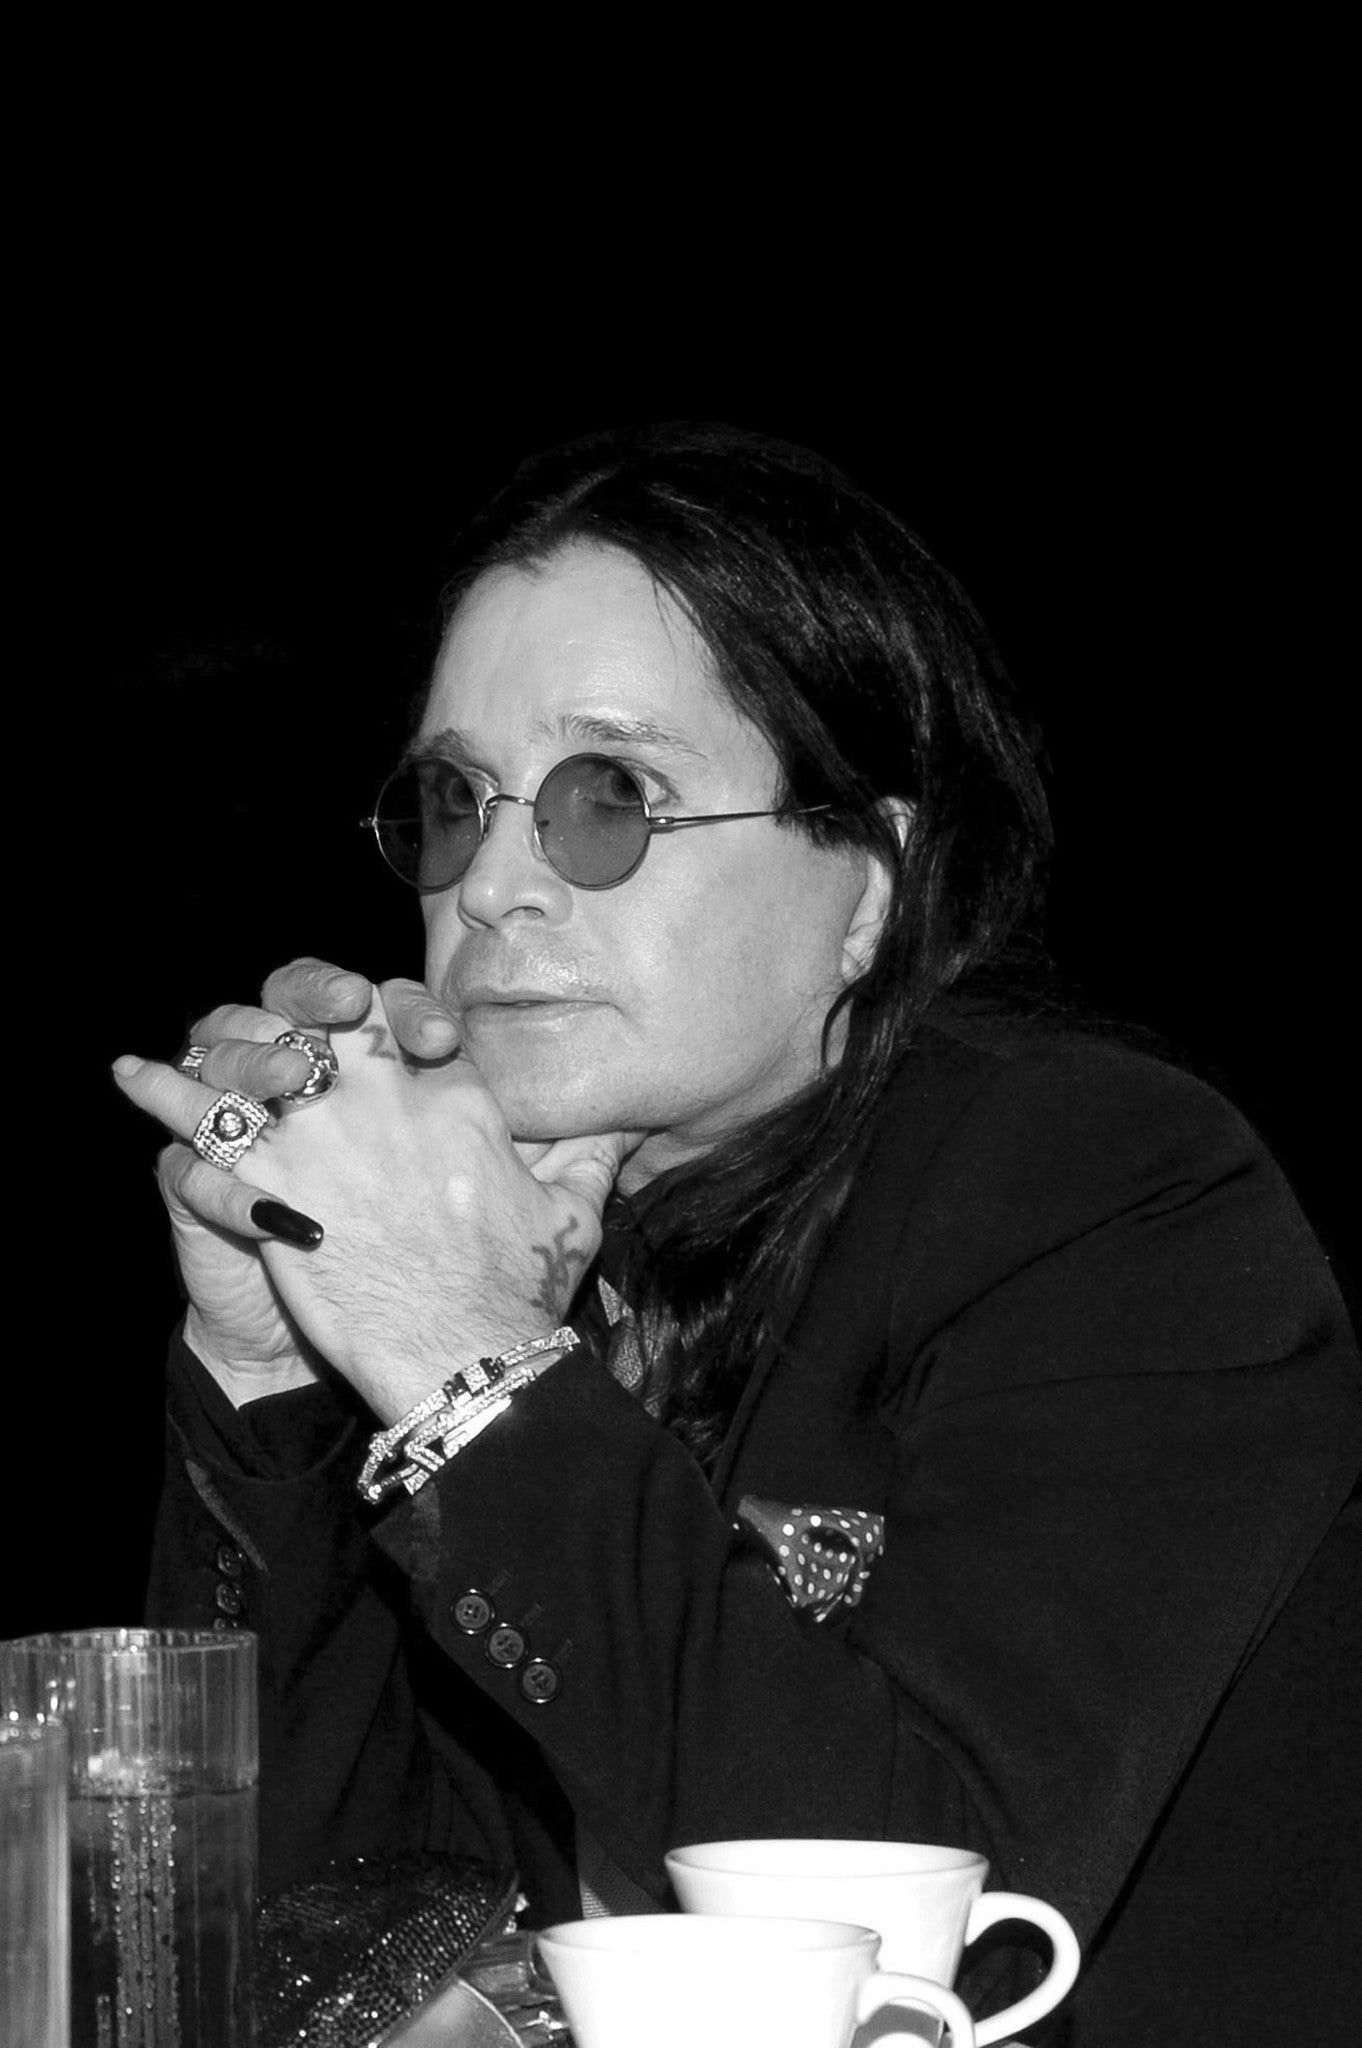 OZZY OSBOURNE IN CHRIS AIRE WATCH AND JEWELRY